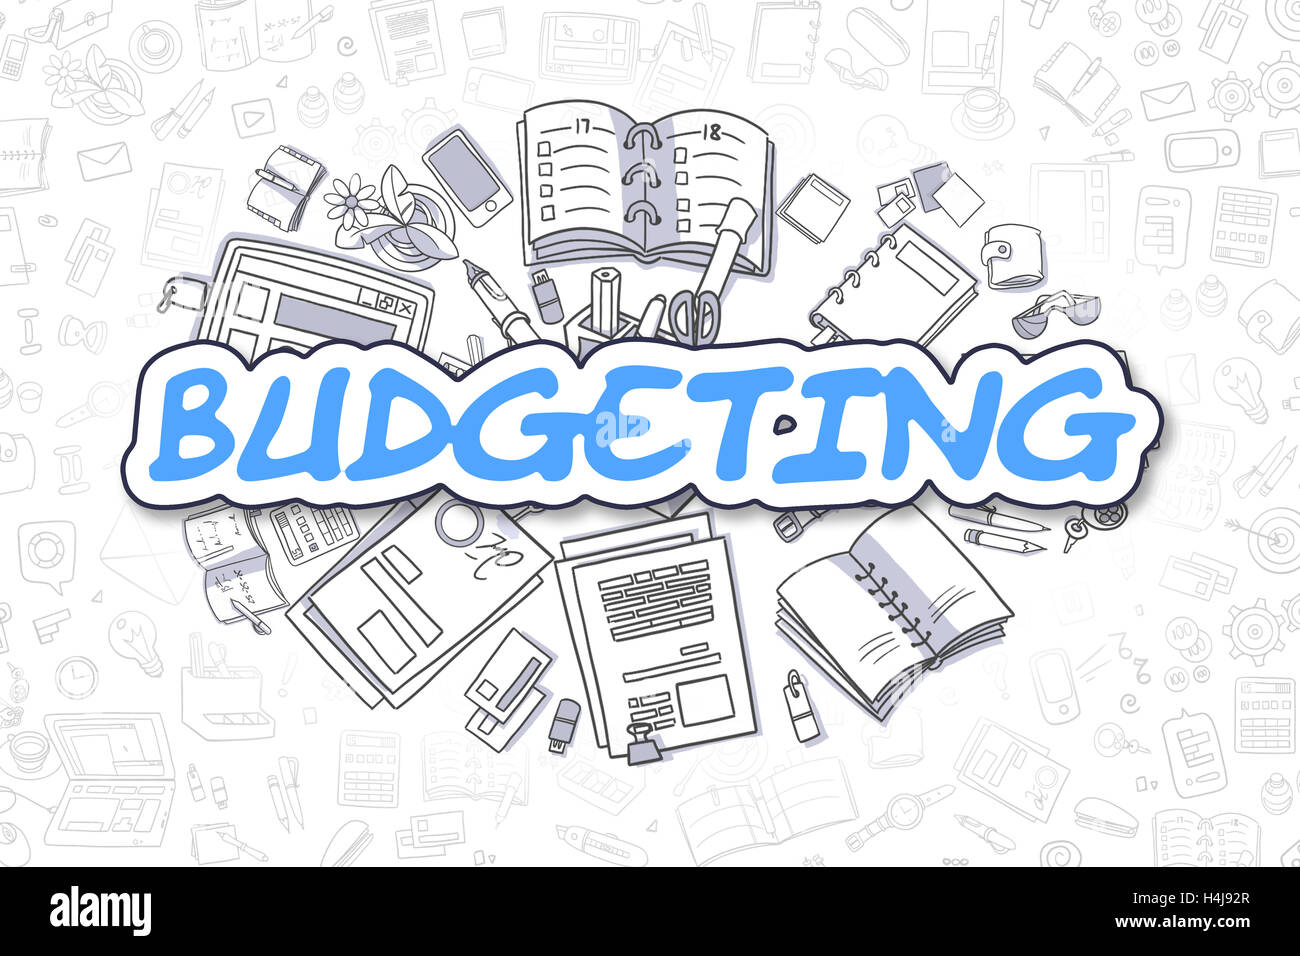 Budgeting - Cartoon Blue Word. Business Concept. Stock Photo